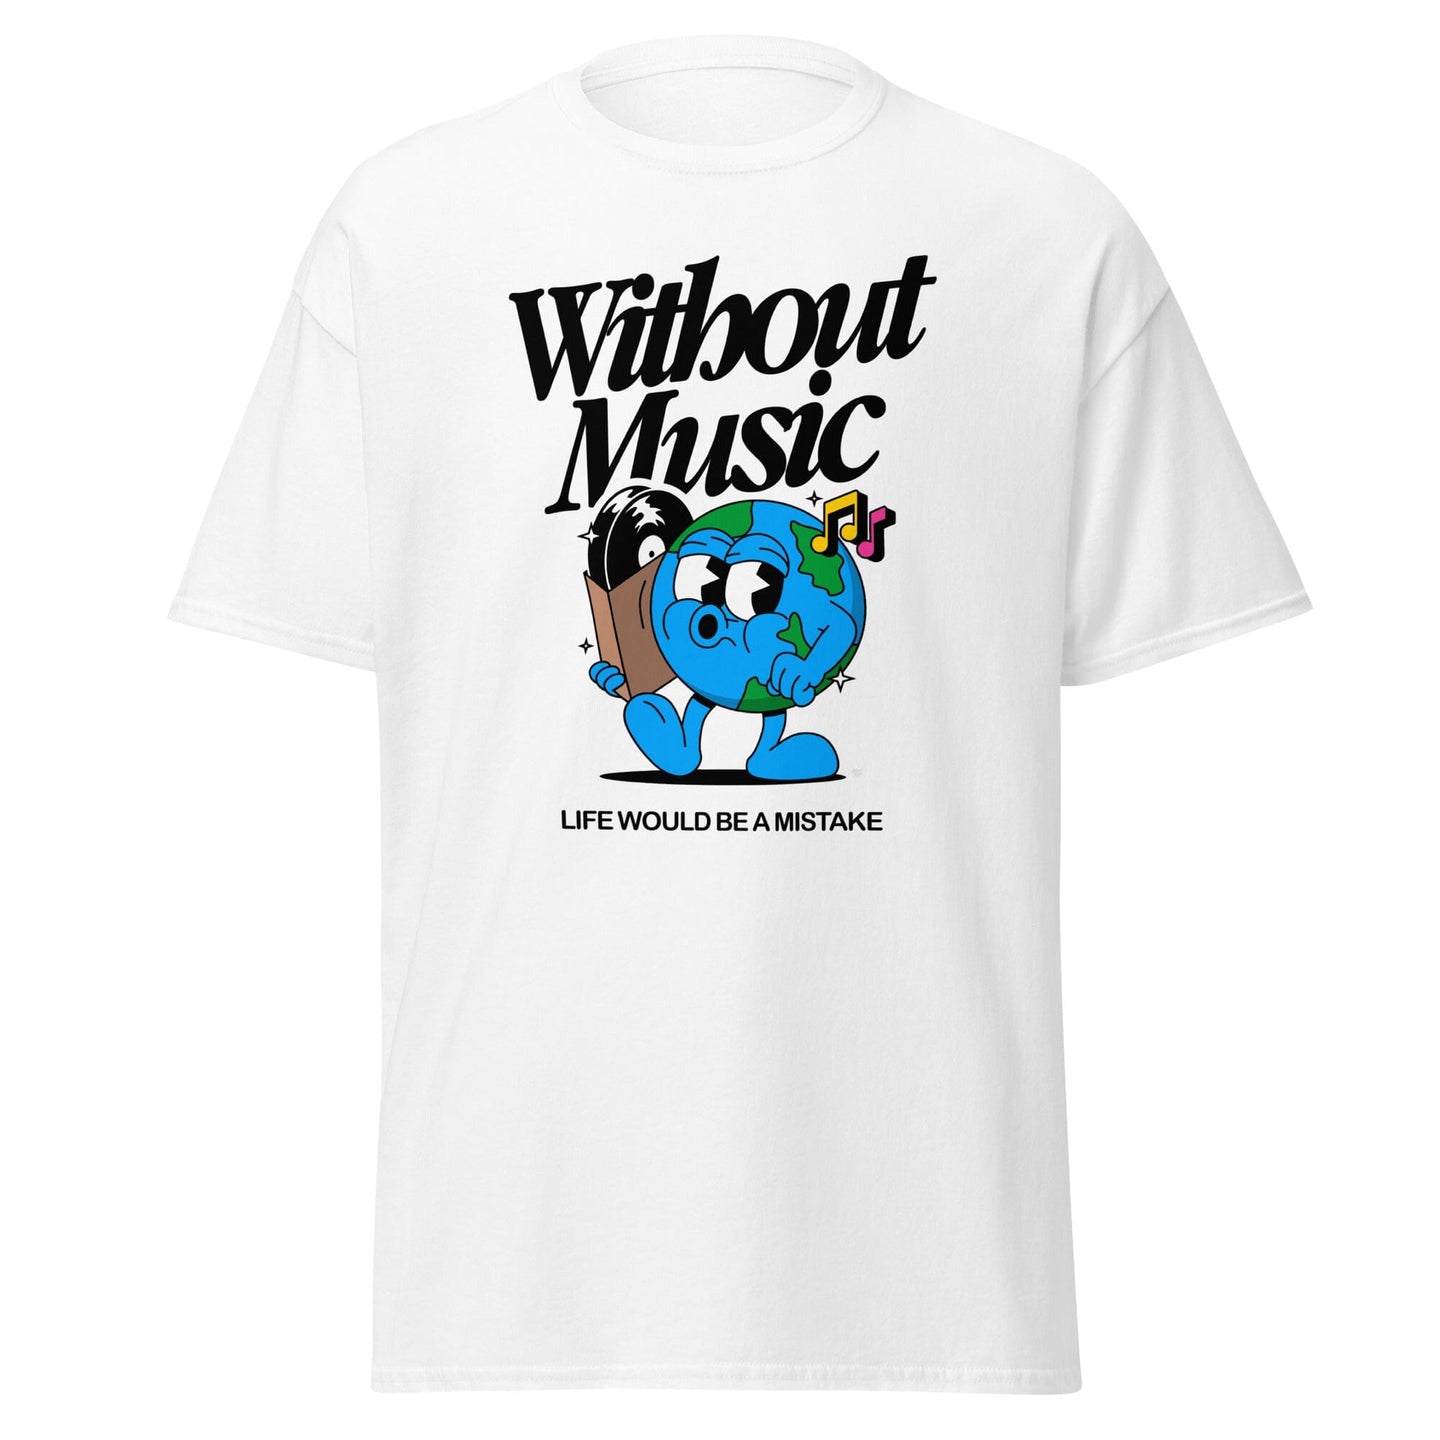 Without Music Life Would be a Mistake Tee by Nevin Fernaldi